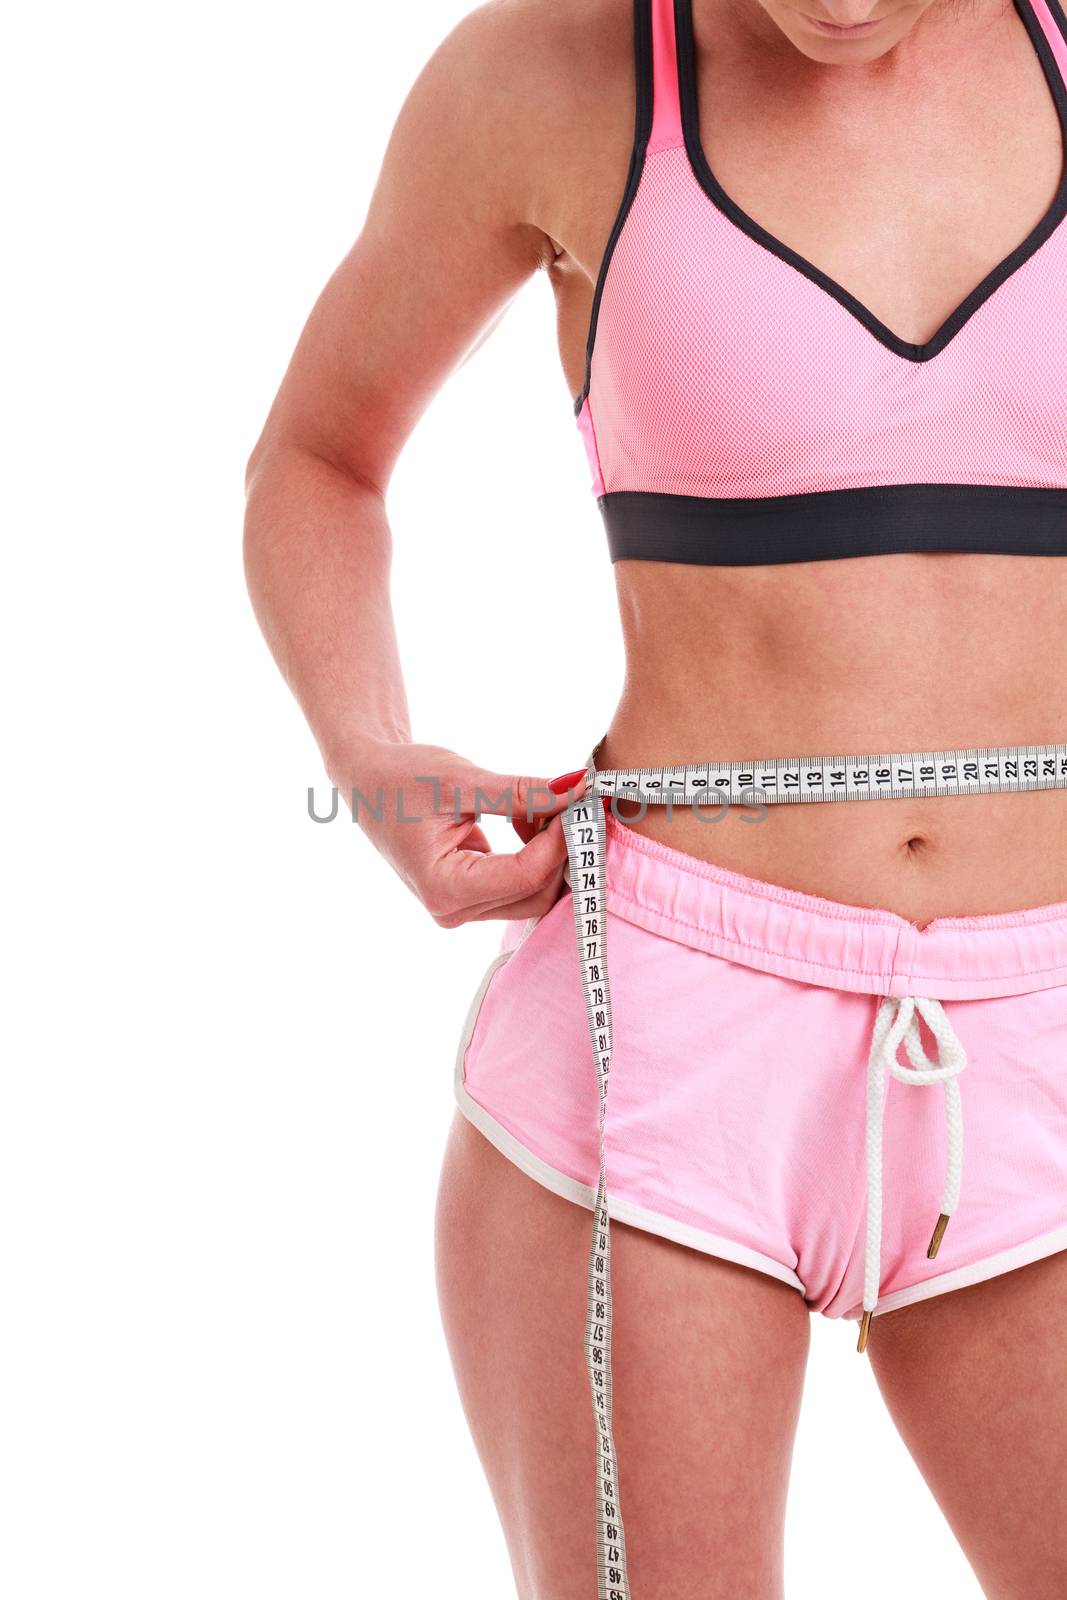 Fitness woman with measure tape isolated on white background